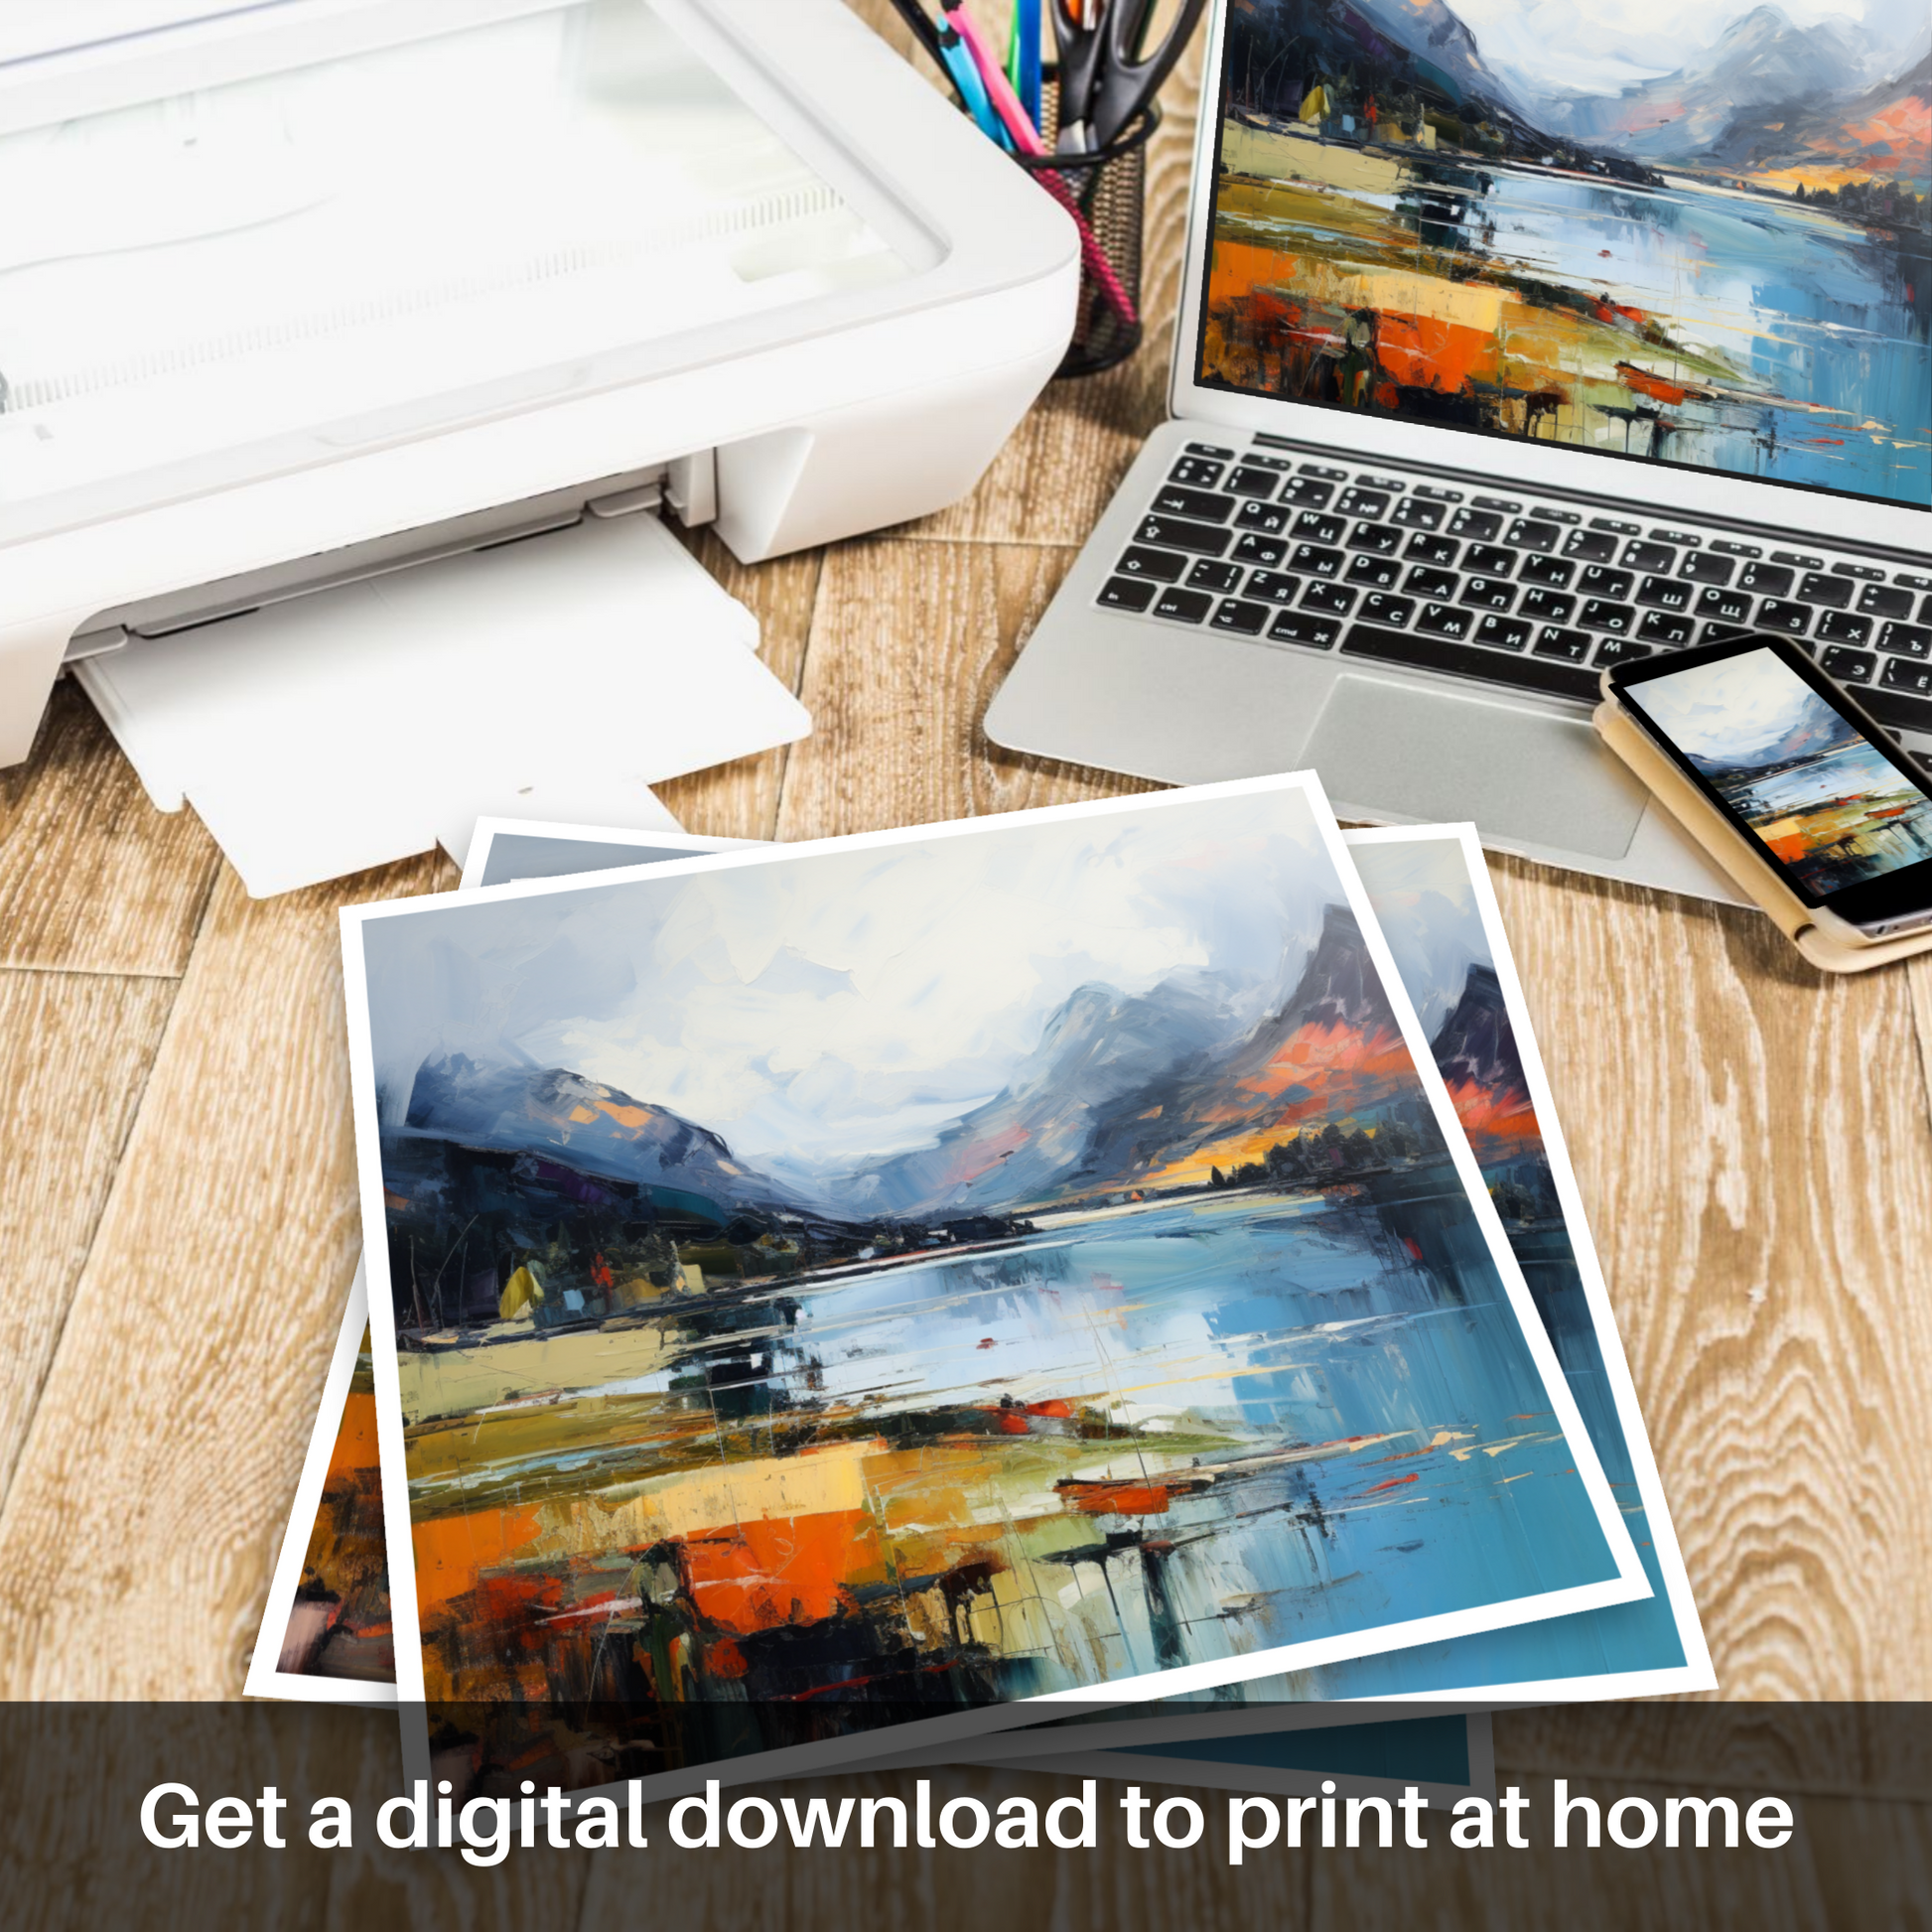 Downloadable and printable picture of Loch Leven, Highlands